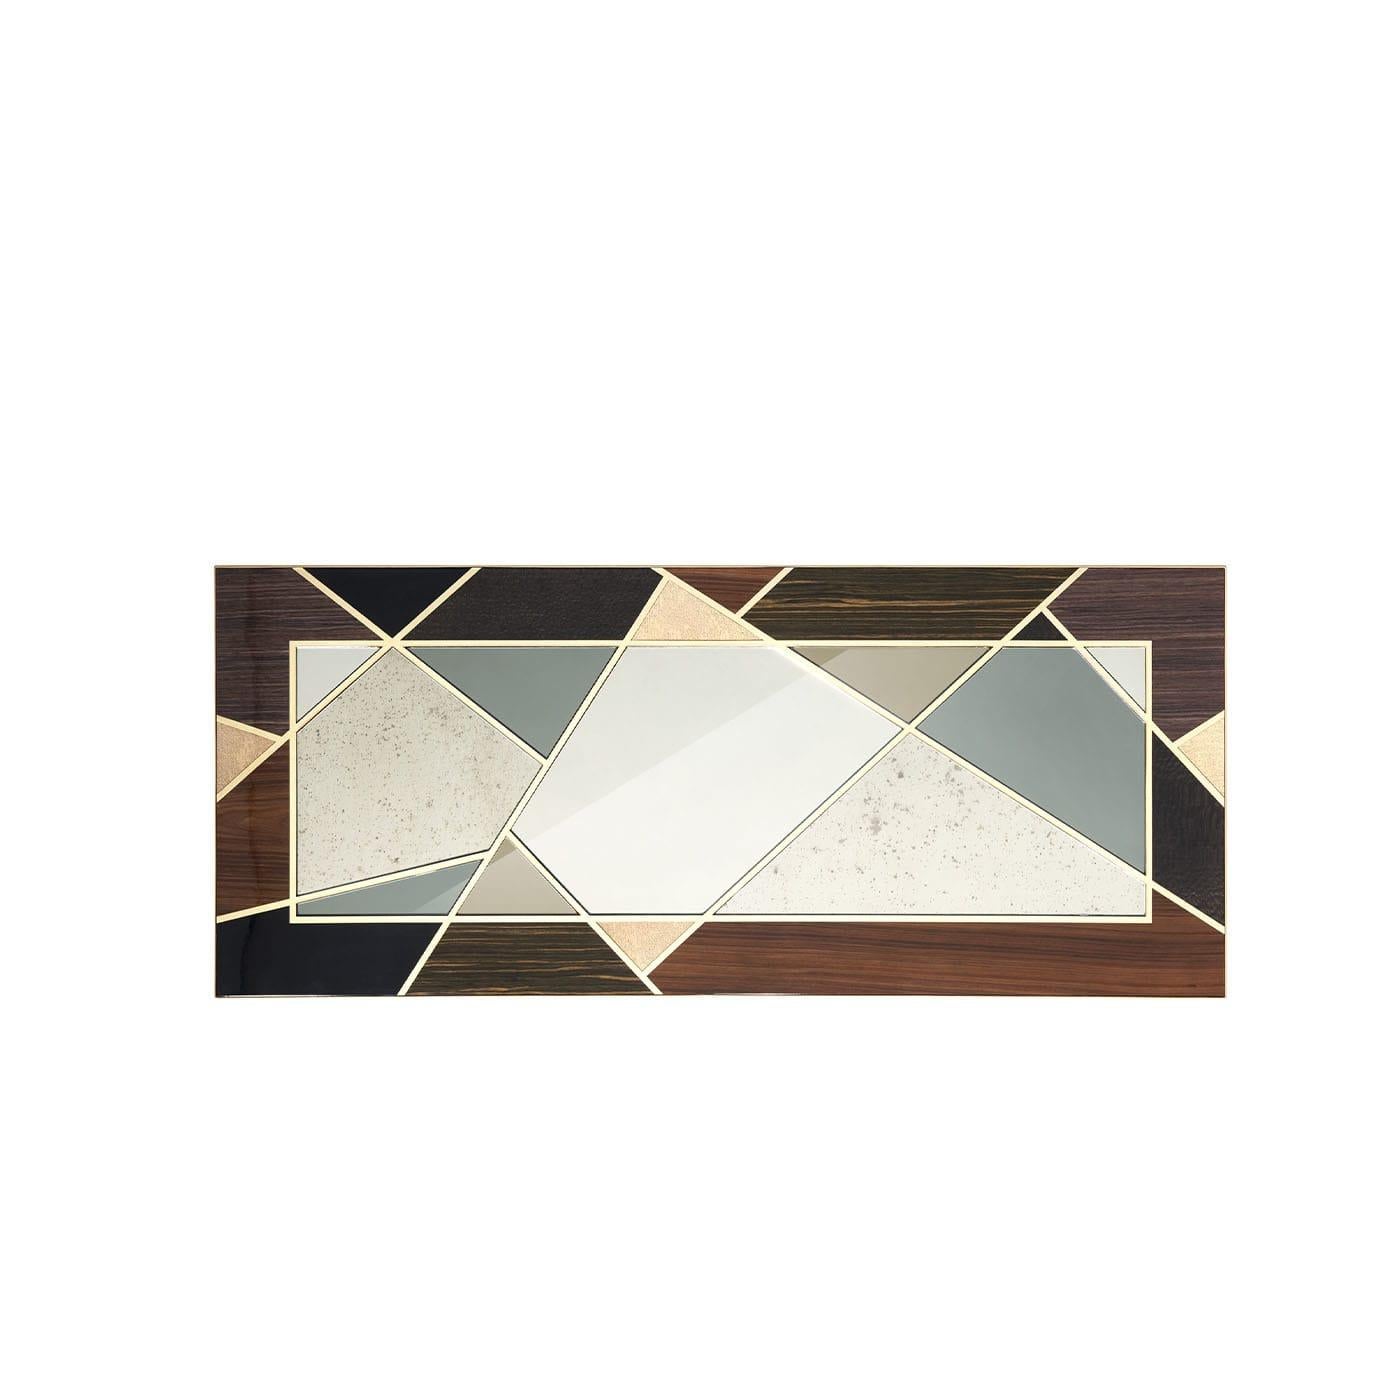 Four different mirror types - classic, antiqued, burnished, and smoky - get combined as if in a striking collage in this artful mirror. Outlined by gold-finished wooden lines, the dynamic and irregular geometry also extends to the frame, where